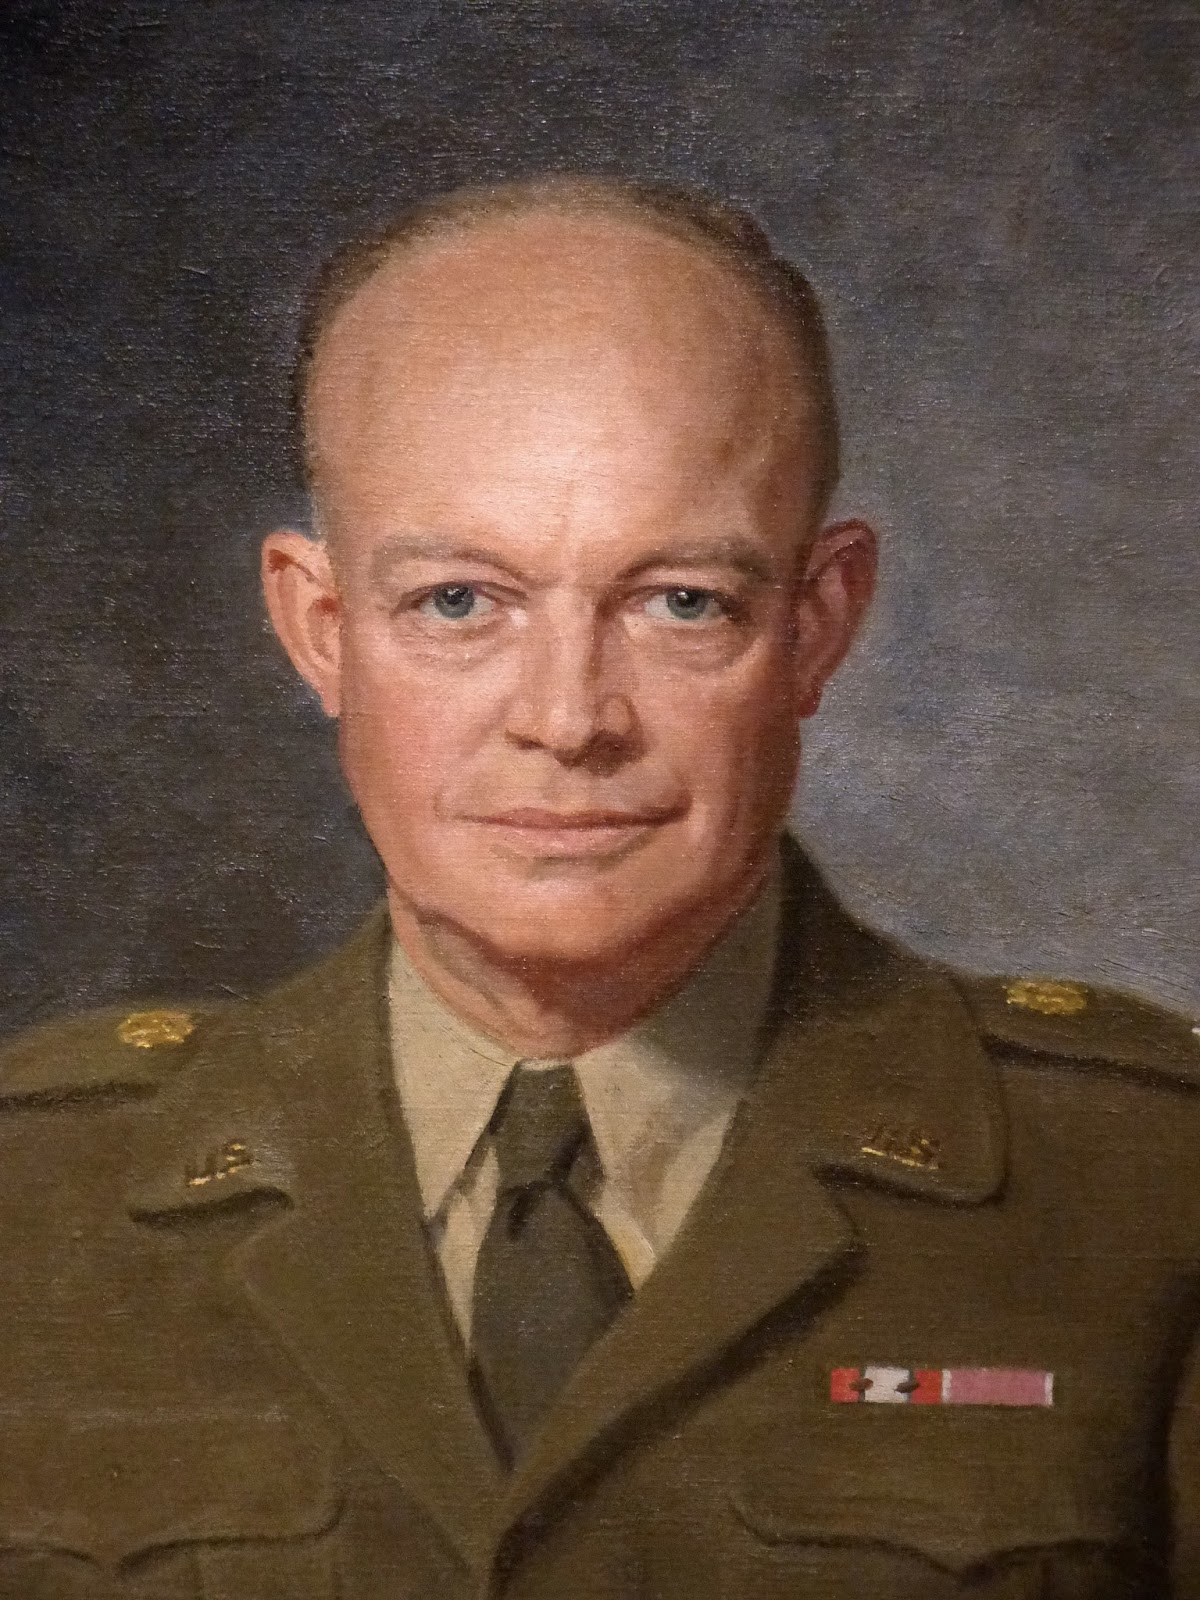 john-eisenhower-military-historian-and-son-of-the-president-dies-at